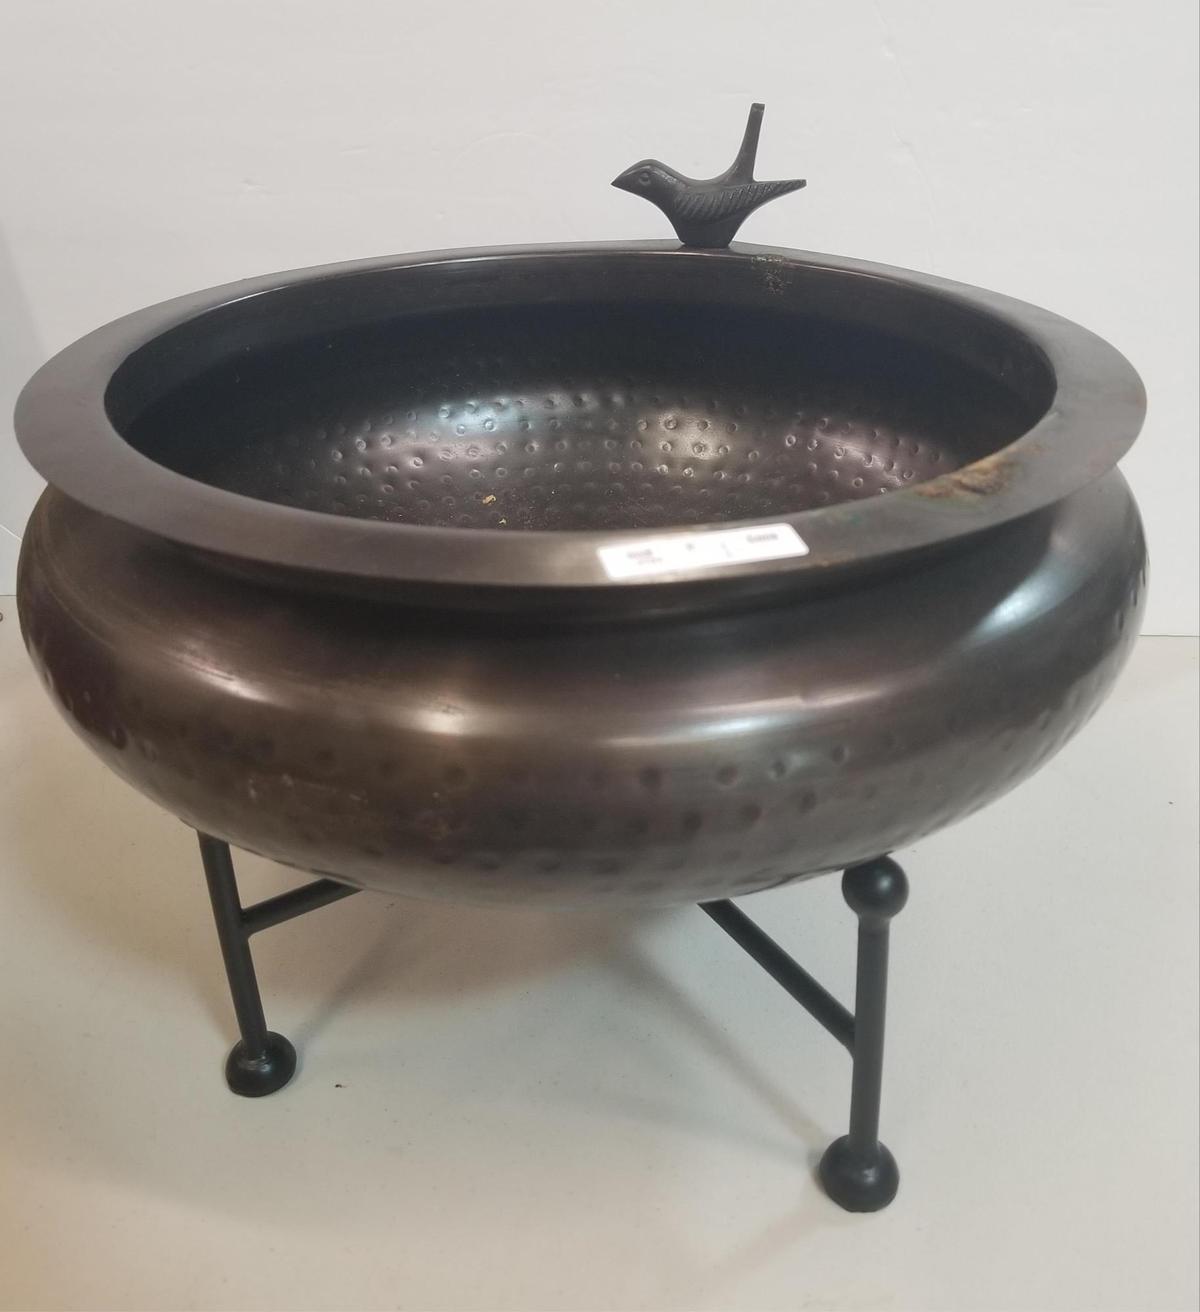 METAL CAULDRON WITH STAND